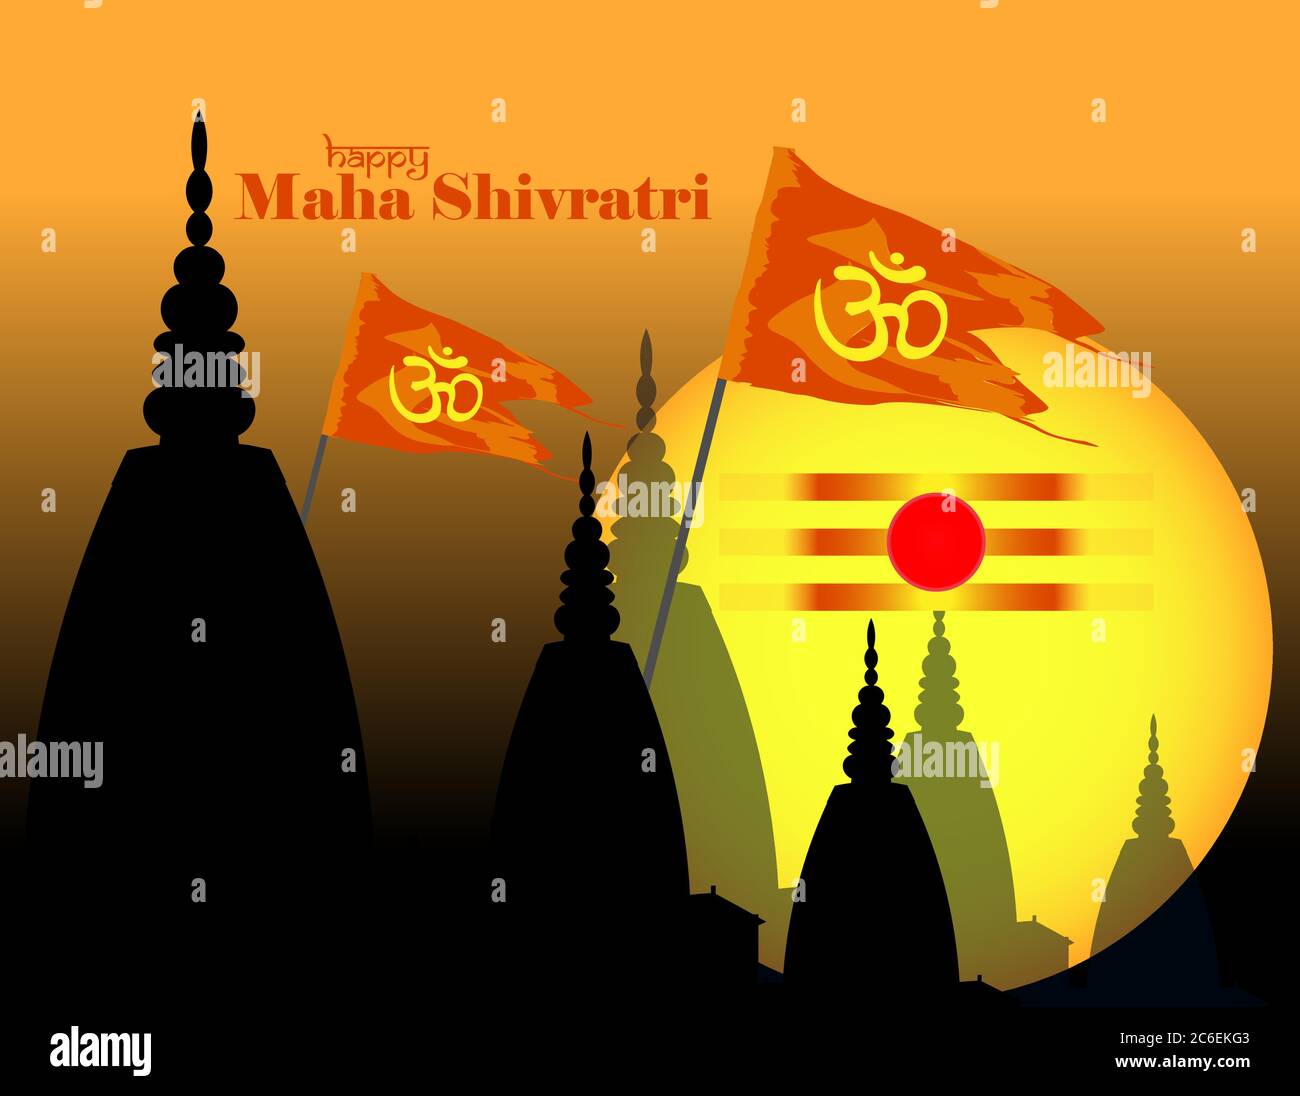 Vector Illustration Of Greeting Card For Maha Shivratri Greeting Card For Hindu Festival Maha 4406